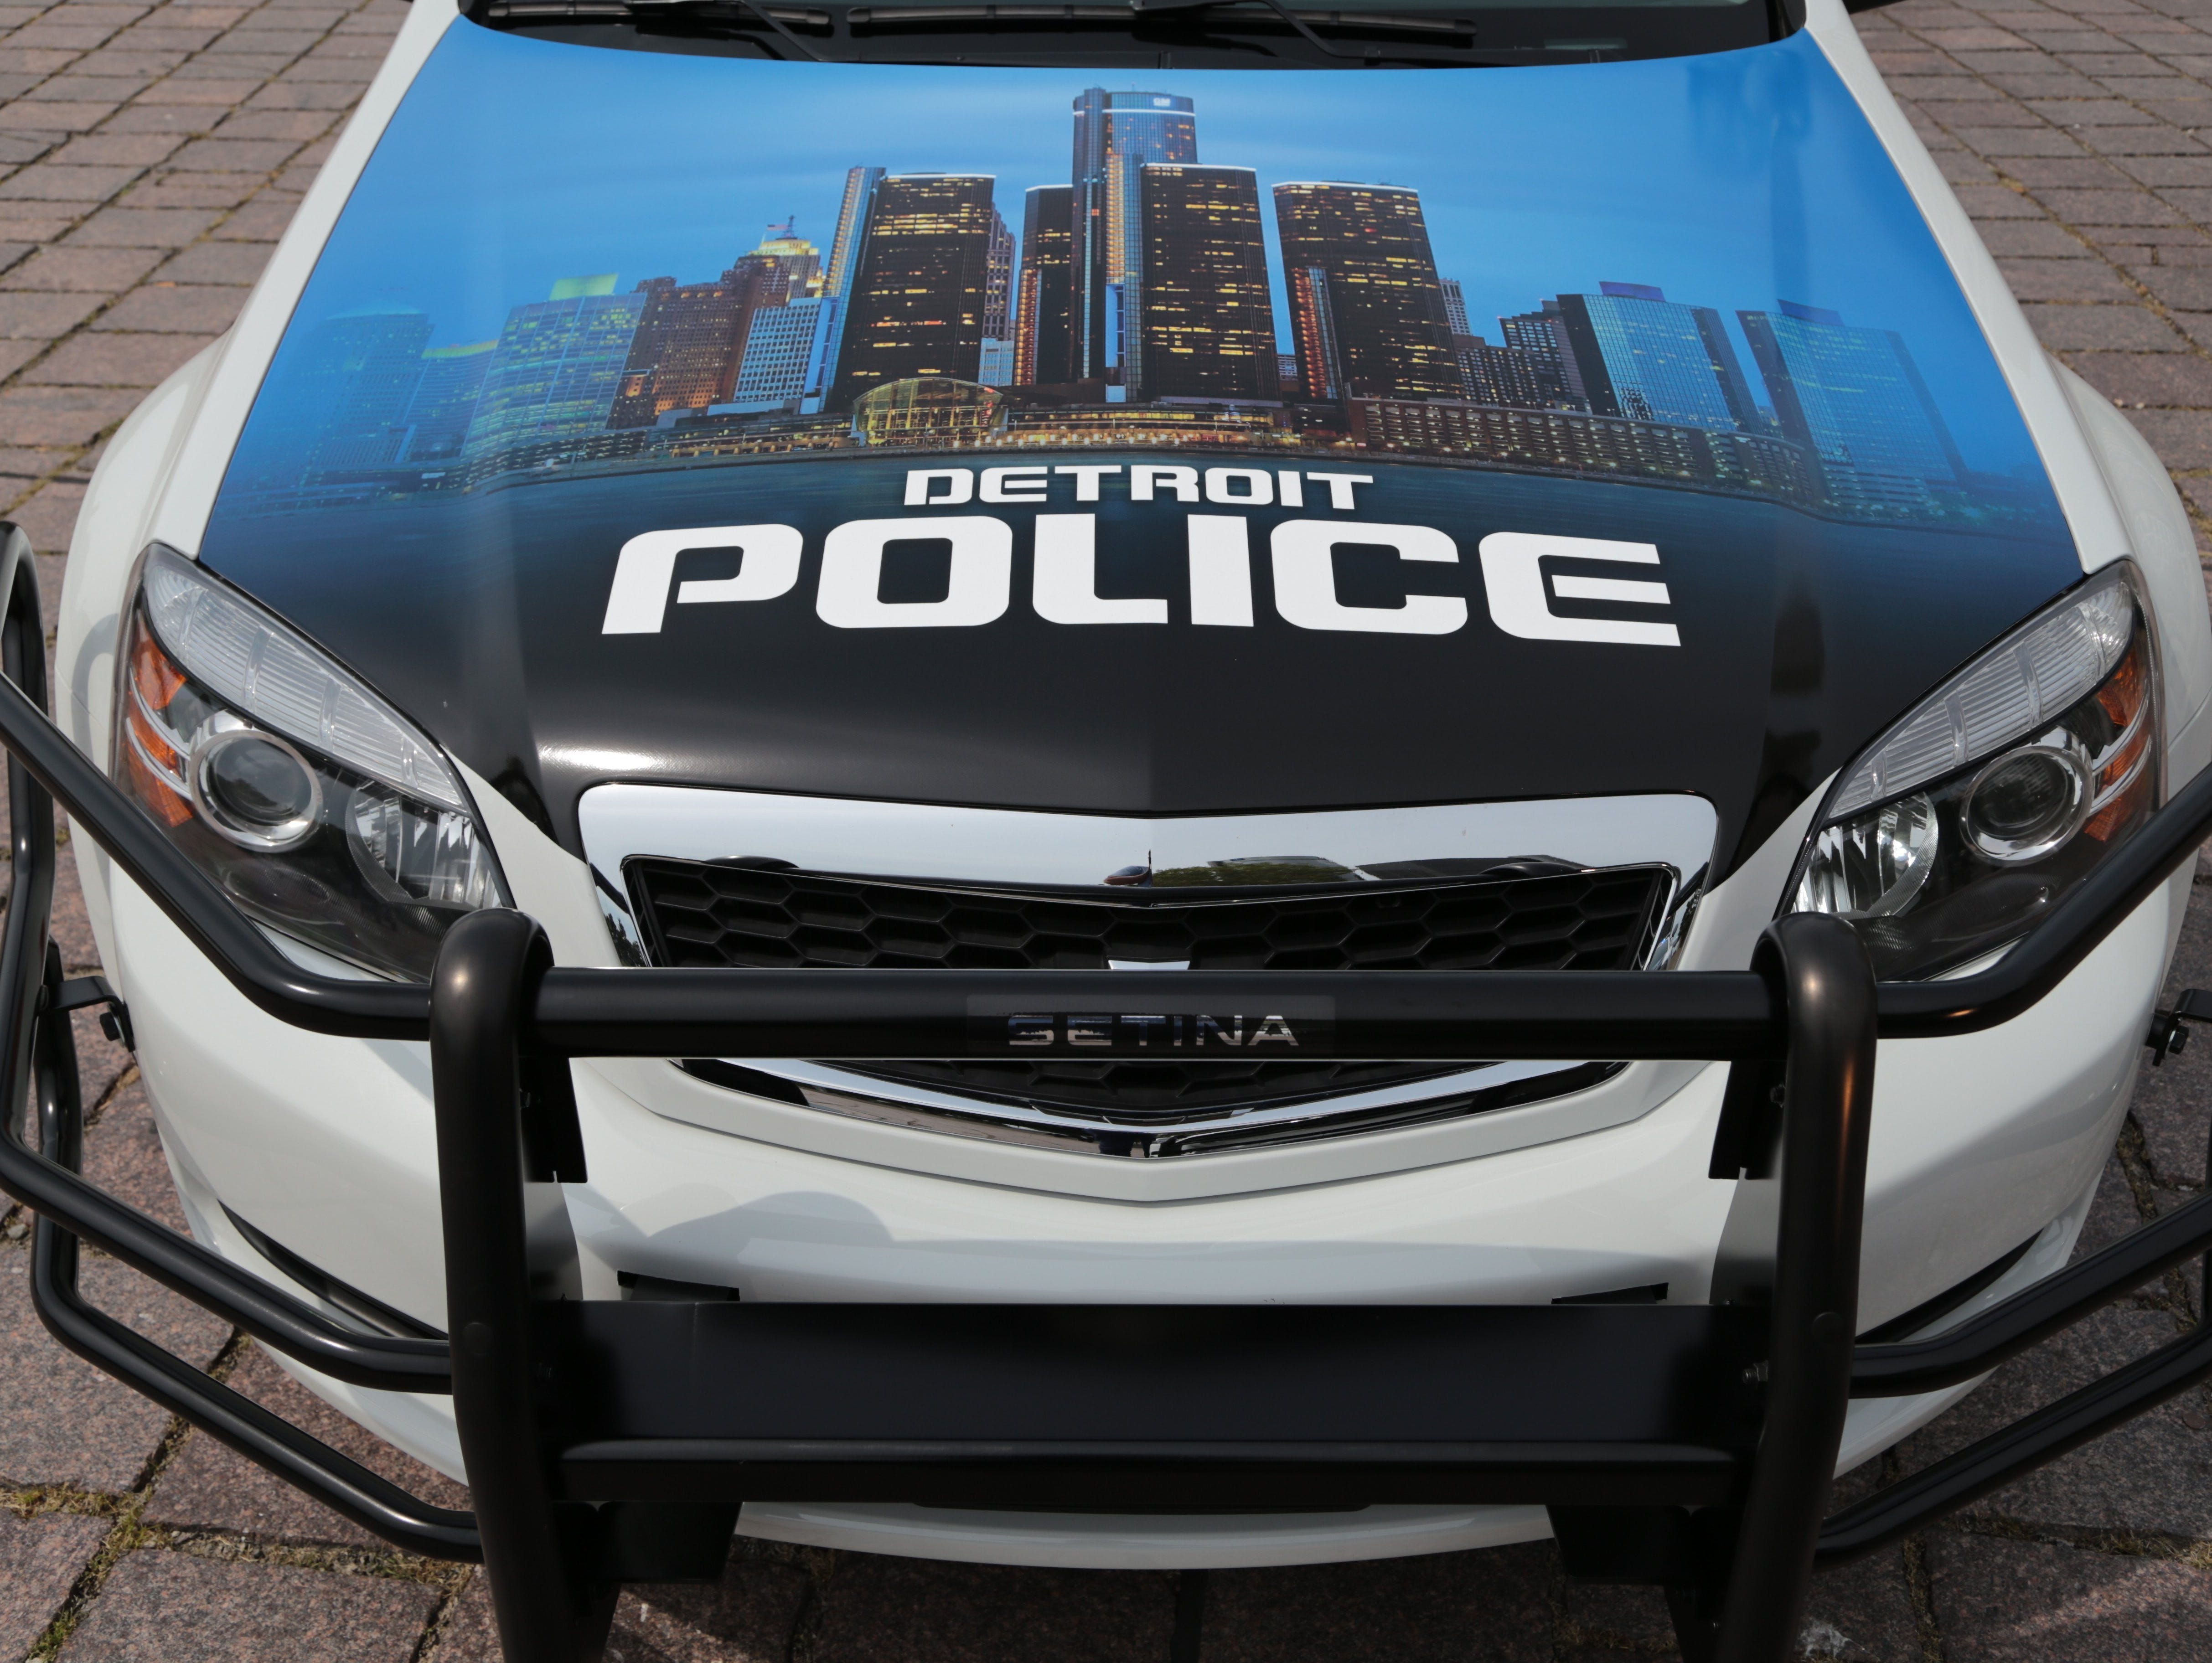 Three suburban teens are suing six Detroit police officers for alleged misconduct, claiming they were wrongfully arrested following a botched prostitution bust outside a Coney Island restaurant in  August.